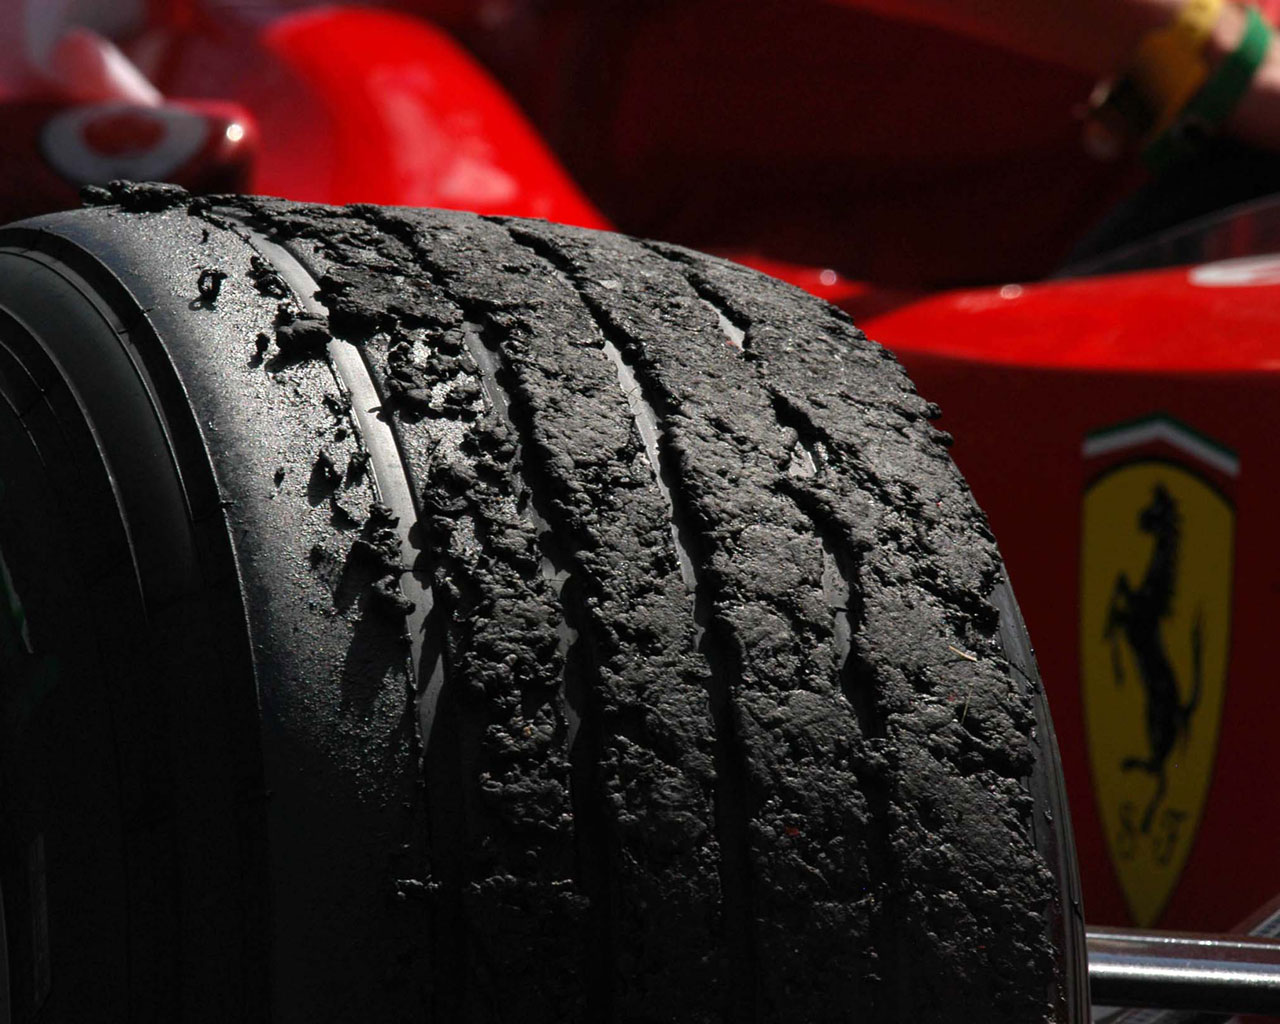 F1 tire after a race